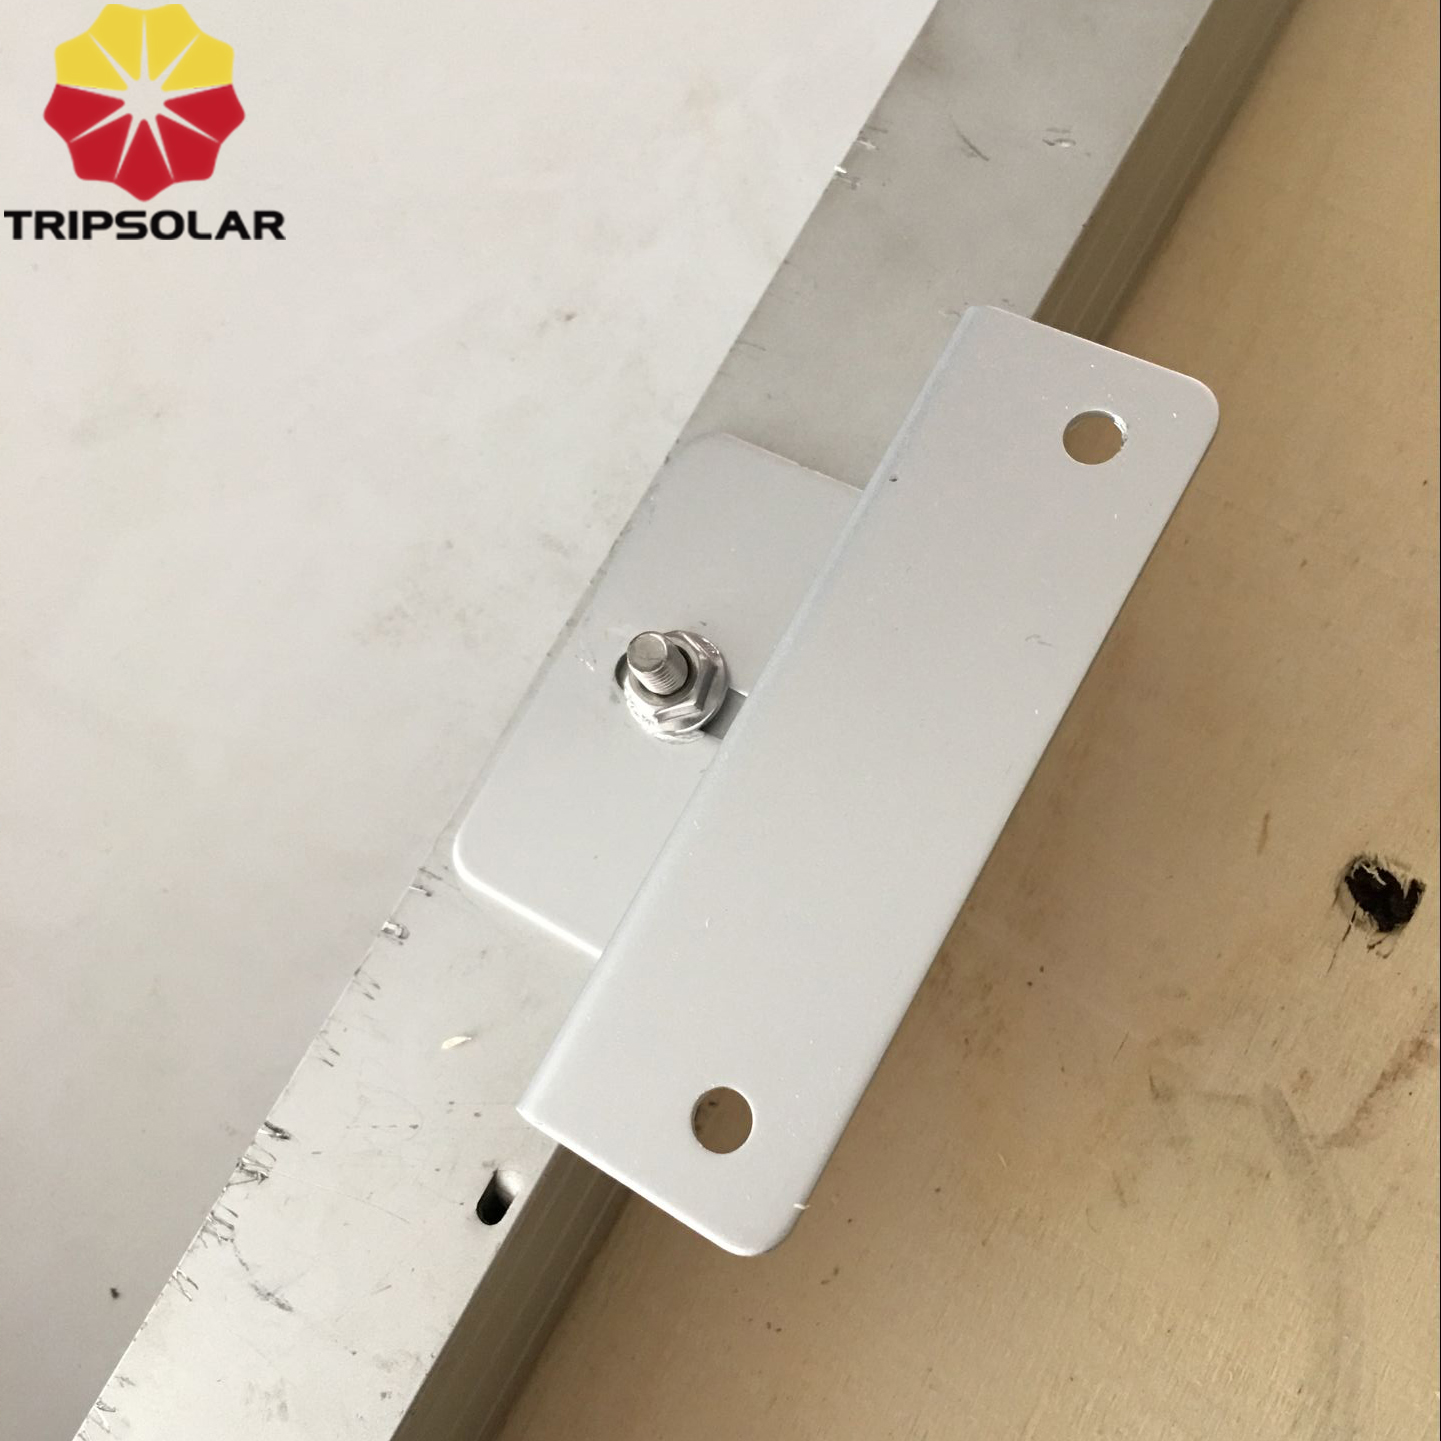 Installation and fixation of Z-shaped bracket TP-LKR-01 for the roof of Chuanpu 100W solar panel RV